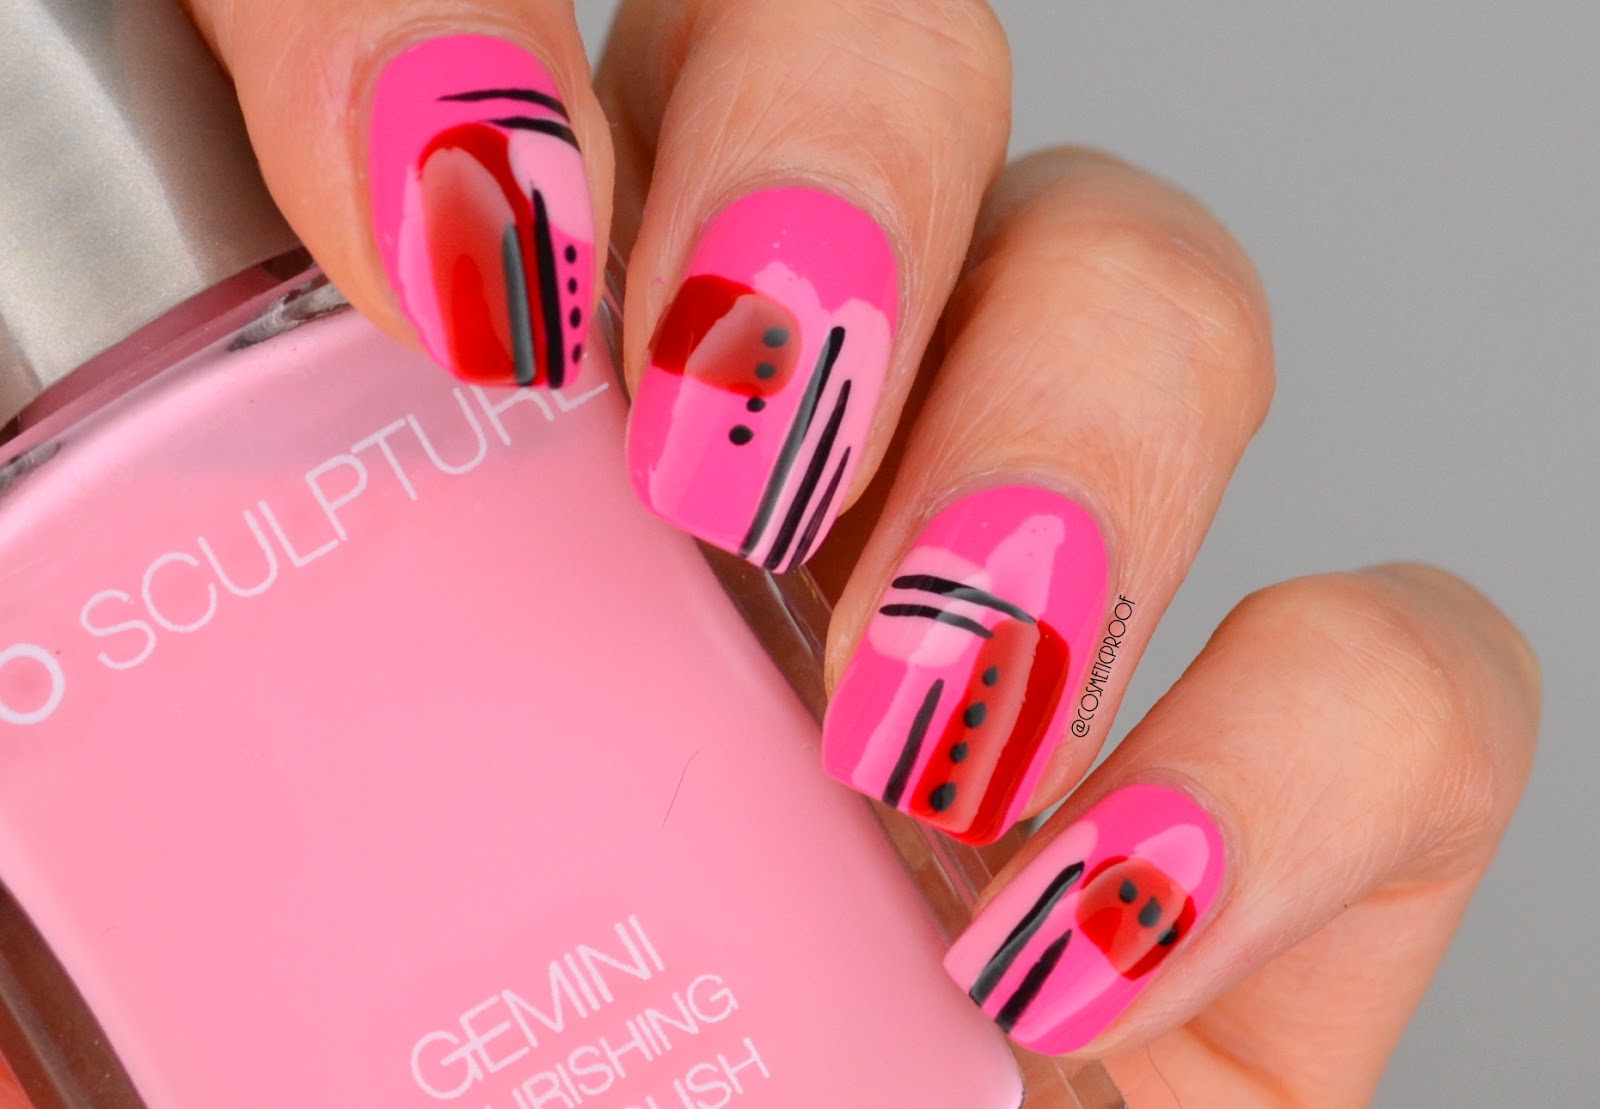 2. Abstract Lines Nail Art - wide 8